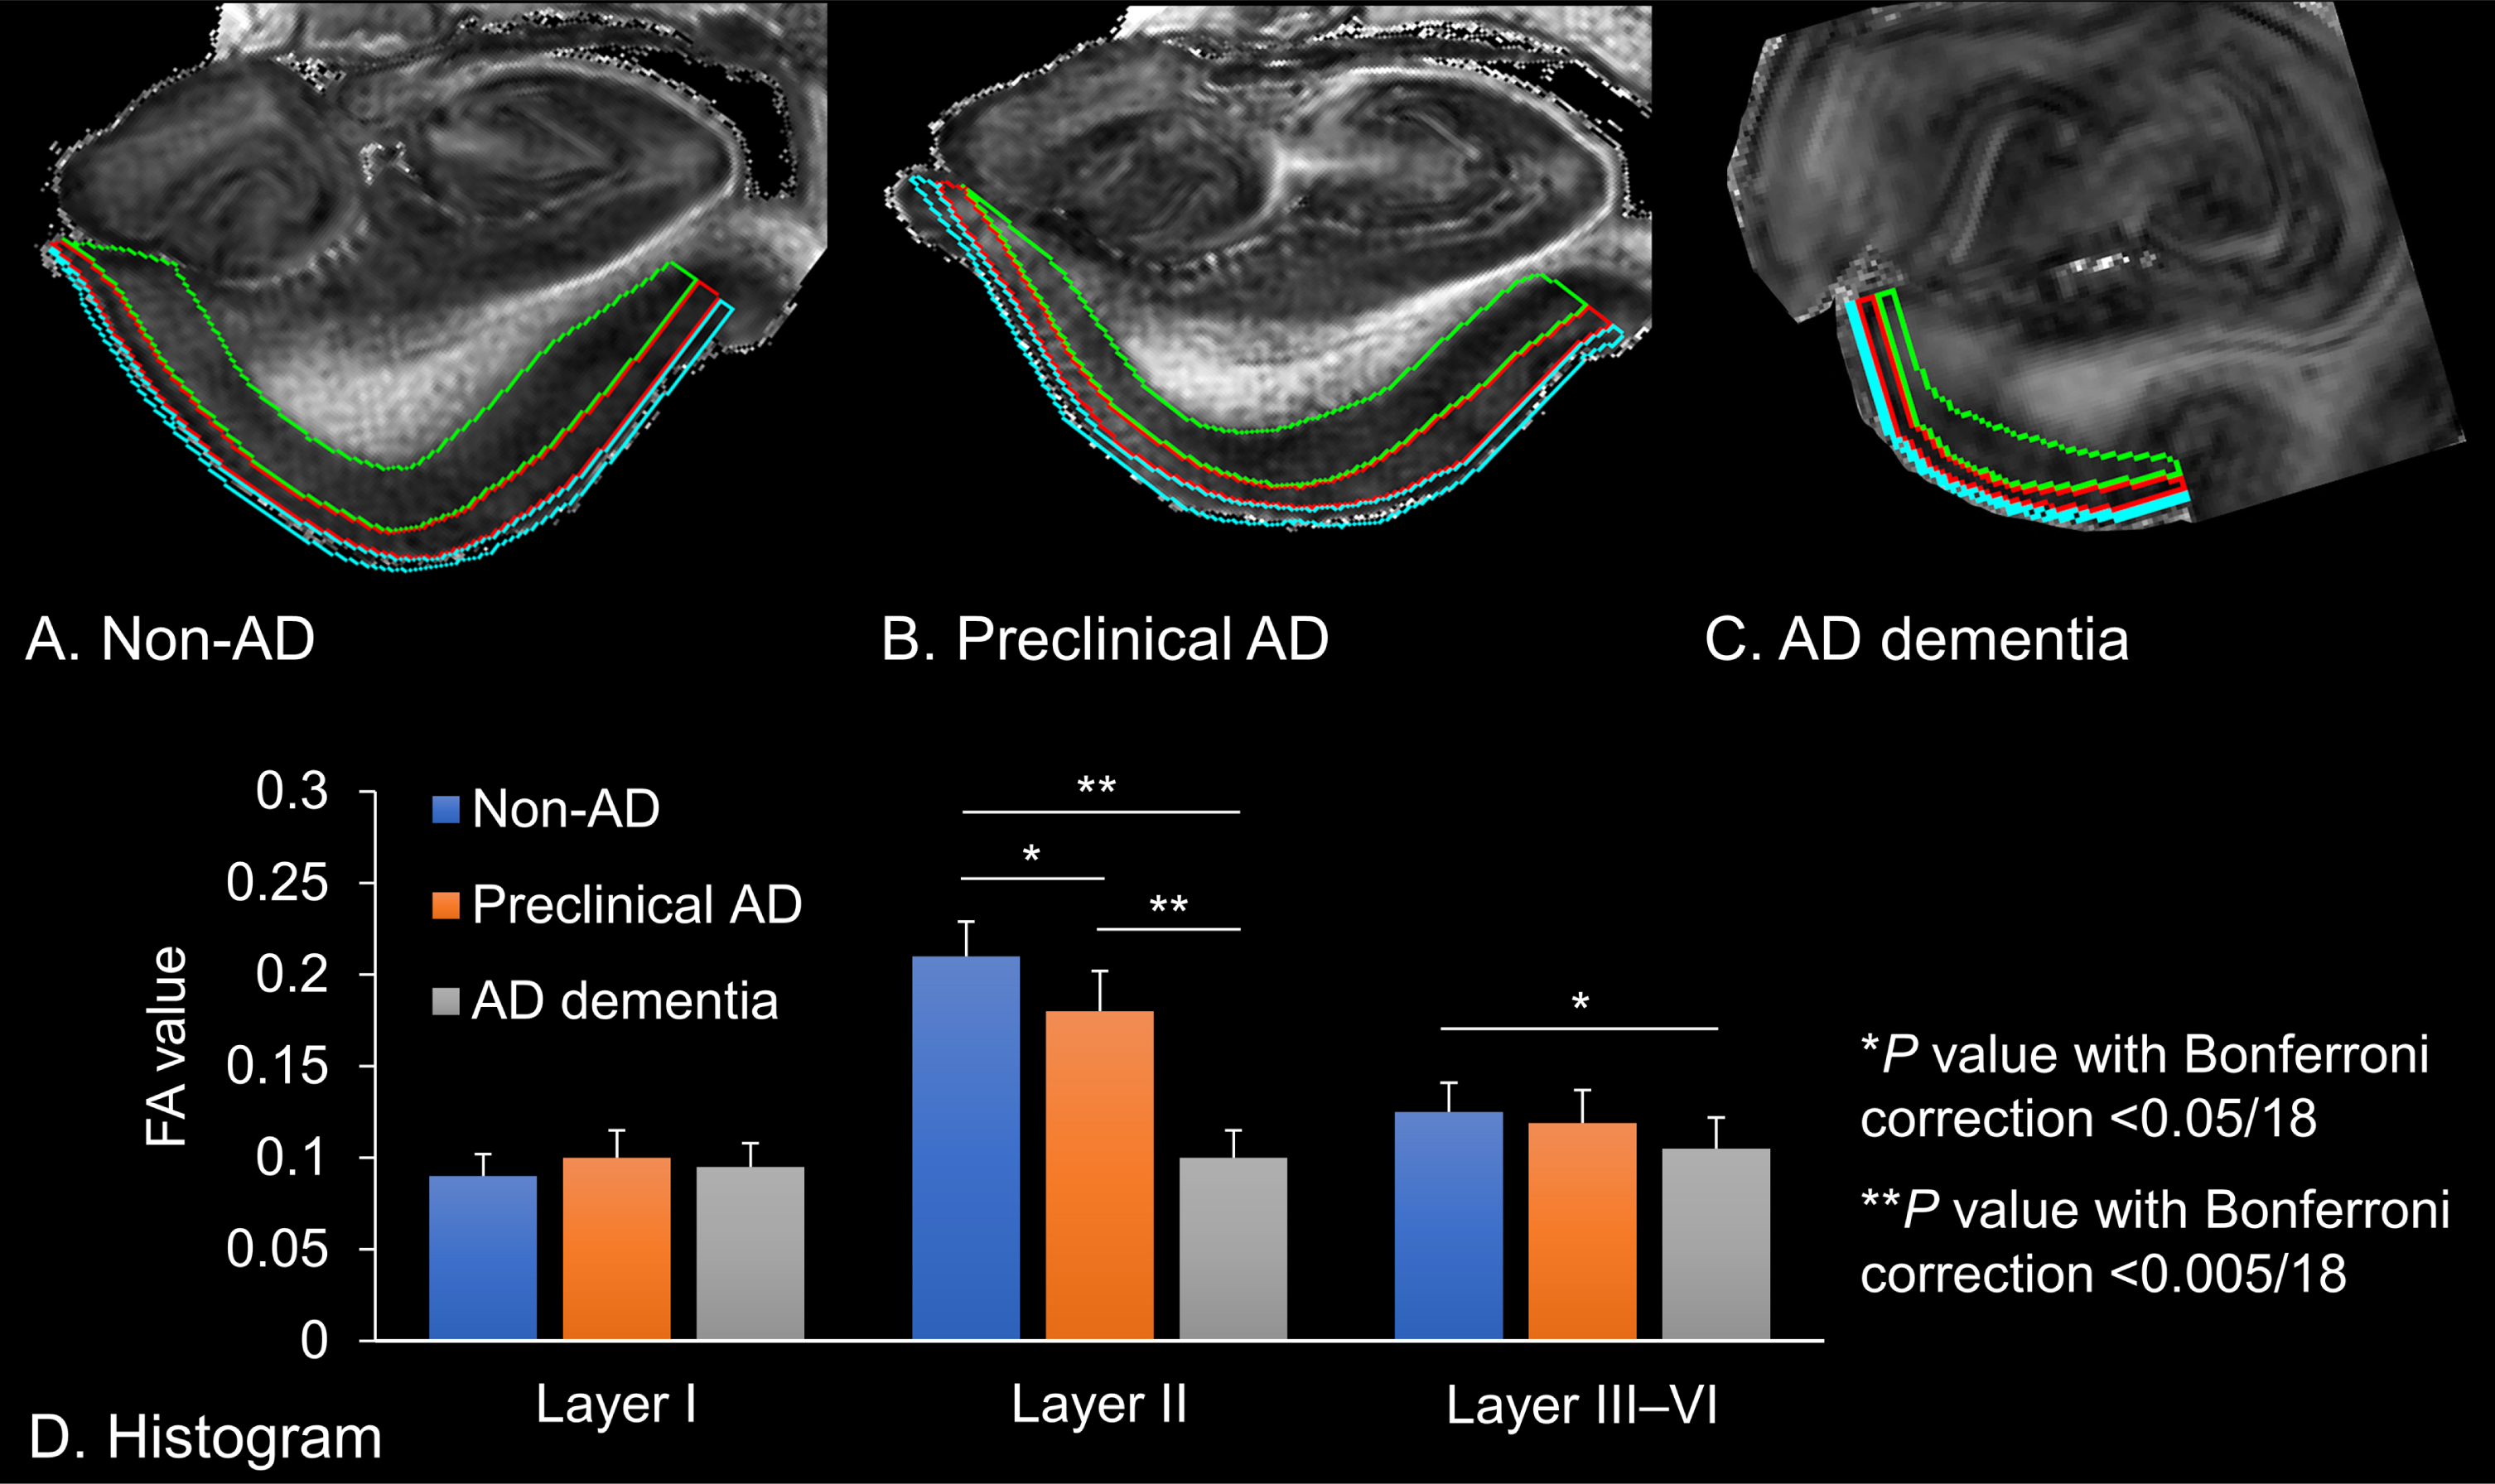 Fractional anisotropy (FA) values extracted from the left entorhinal cortices. A) Non-Alzheimer’s disease (AD) brain tissue, which is delineated for each entorhinal cortex. B) Preclinical AD brain tissue. C) AD dementia brain tissue. Cyan: Layer I, Red: Layer II, Green: Layer III–VI. D) The histogram shows the FA value of each entorhinal lamina. Error bars indicate standard error of the mean. Asterisks denote significant differences between the mean of the FA values (*p value with Bonferroni correction <0.05/18; **p value with Bonferroni correction <0.005/18).